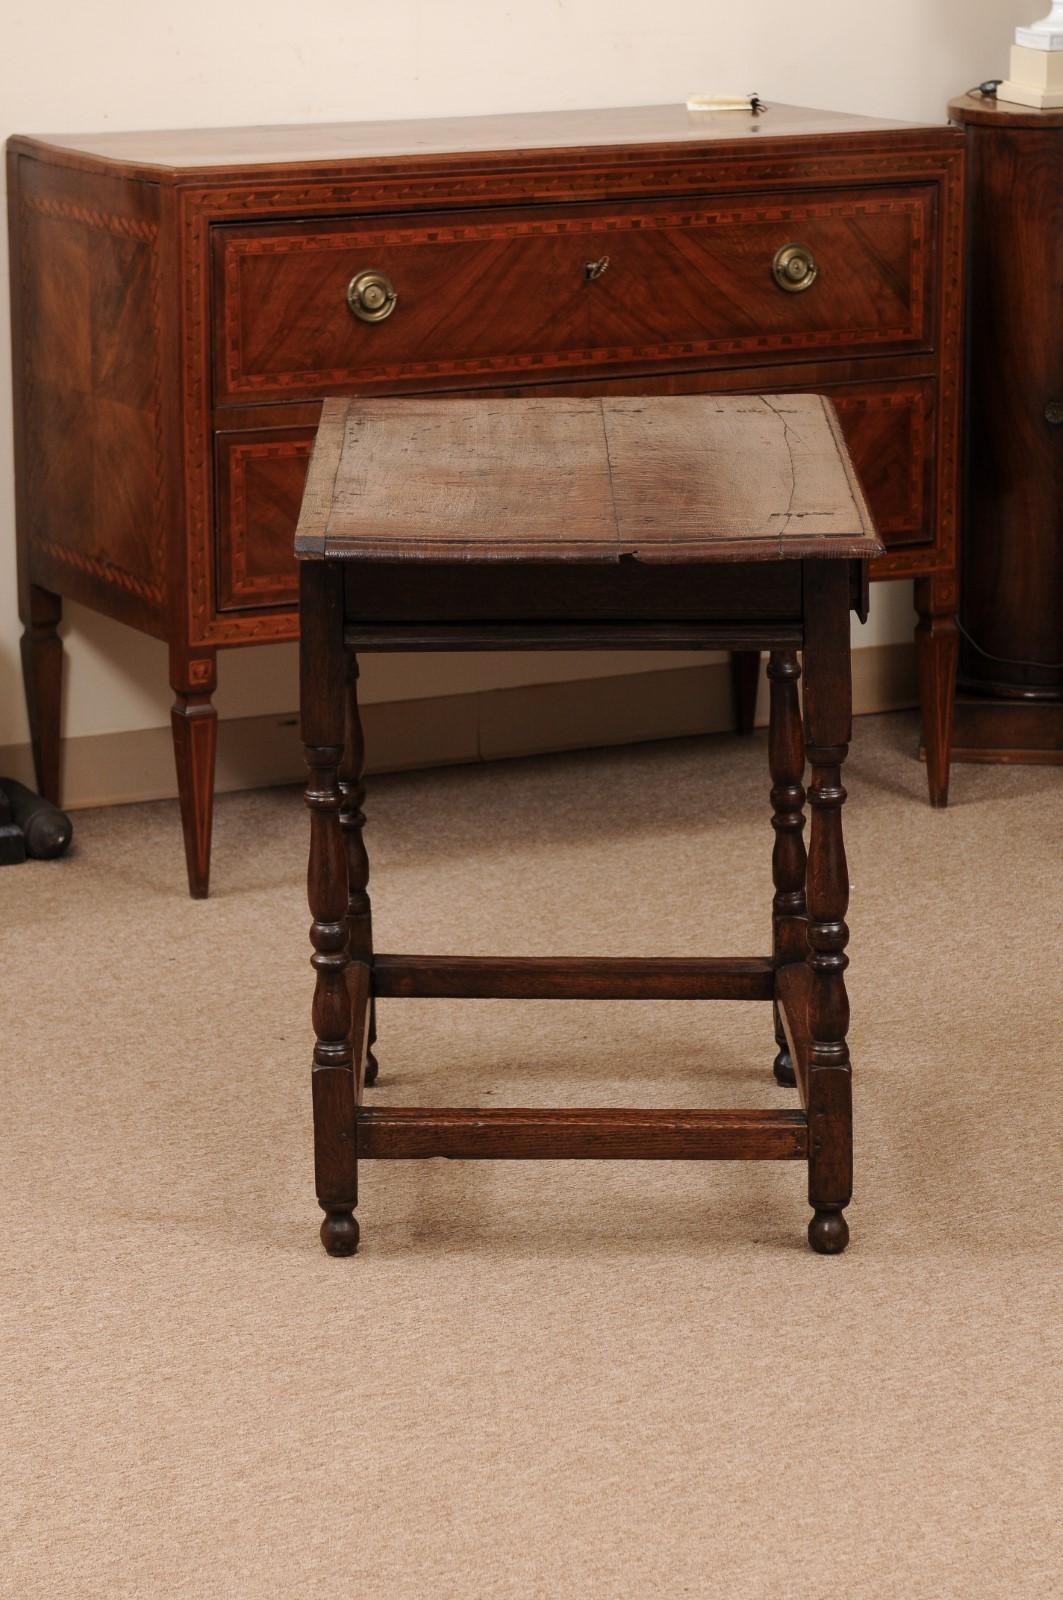 English 18th century Side Table with 1 Drawer, Turned Legs & Box Stretcher 4